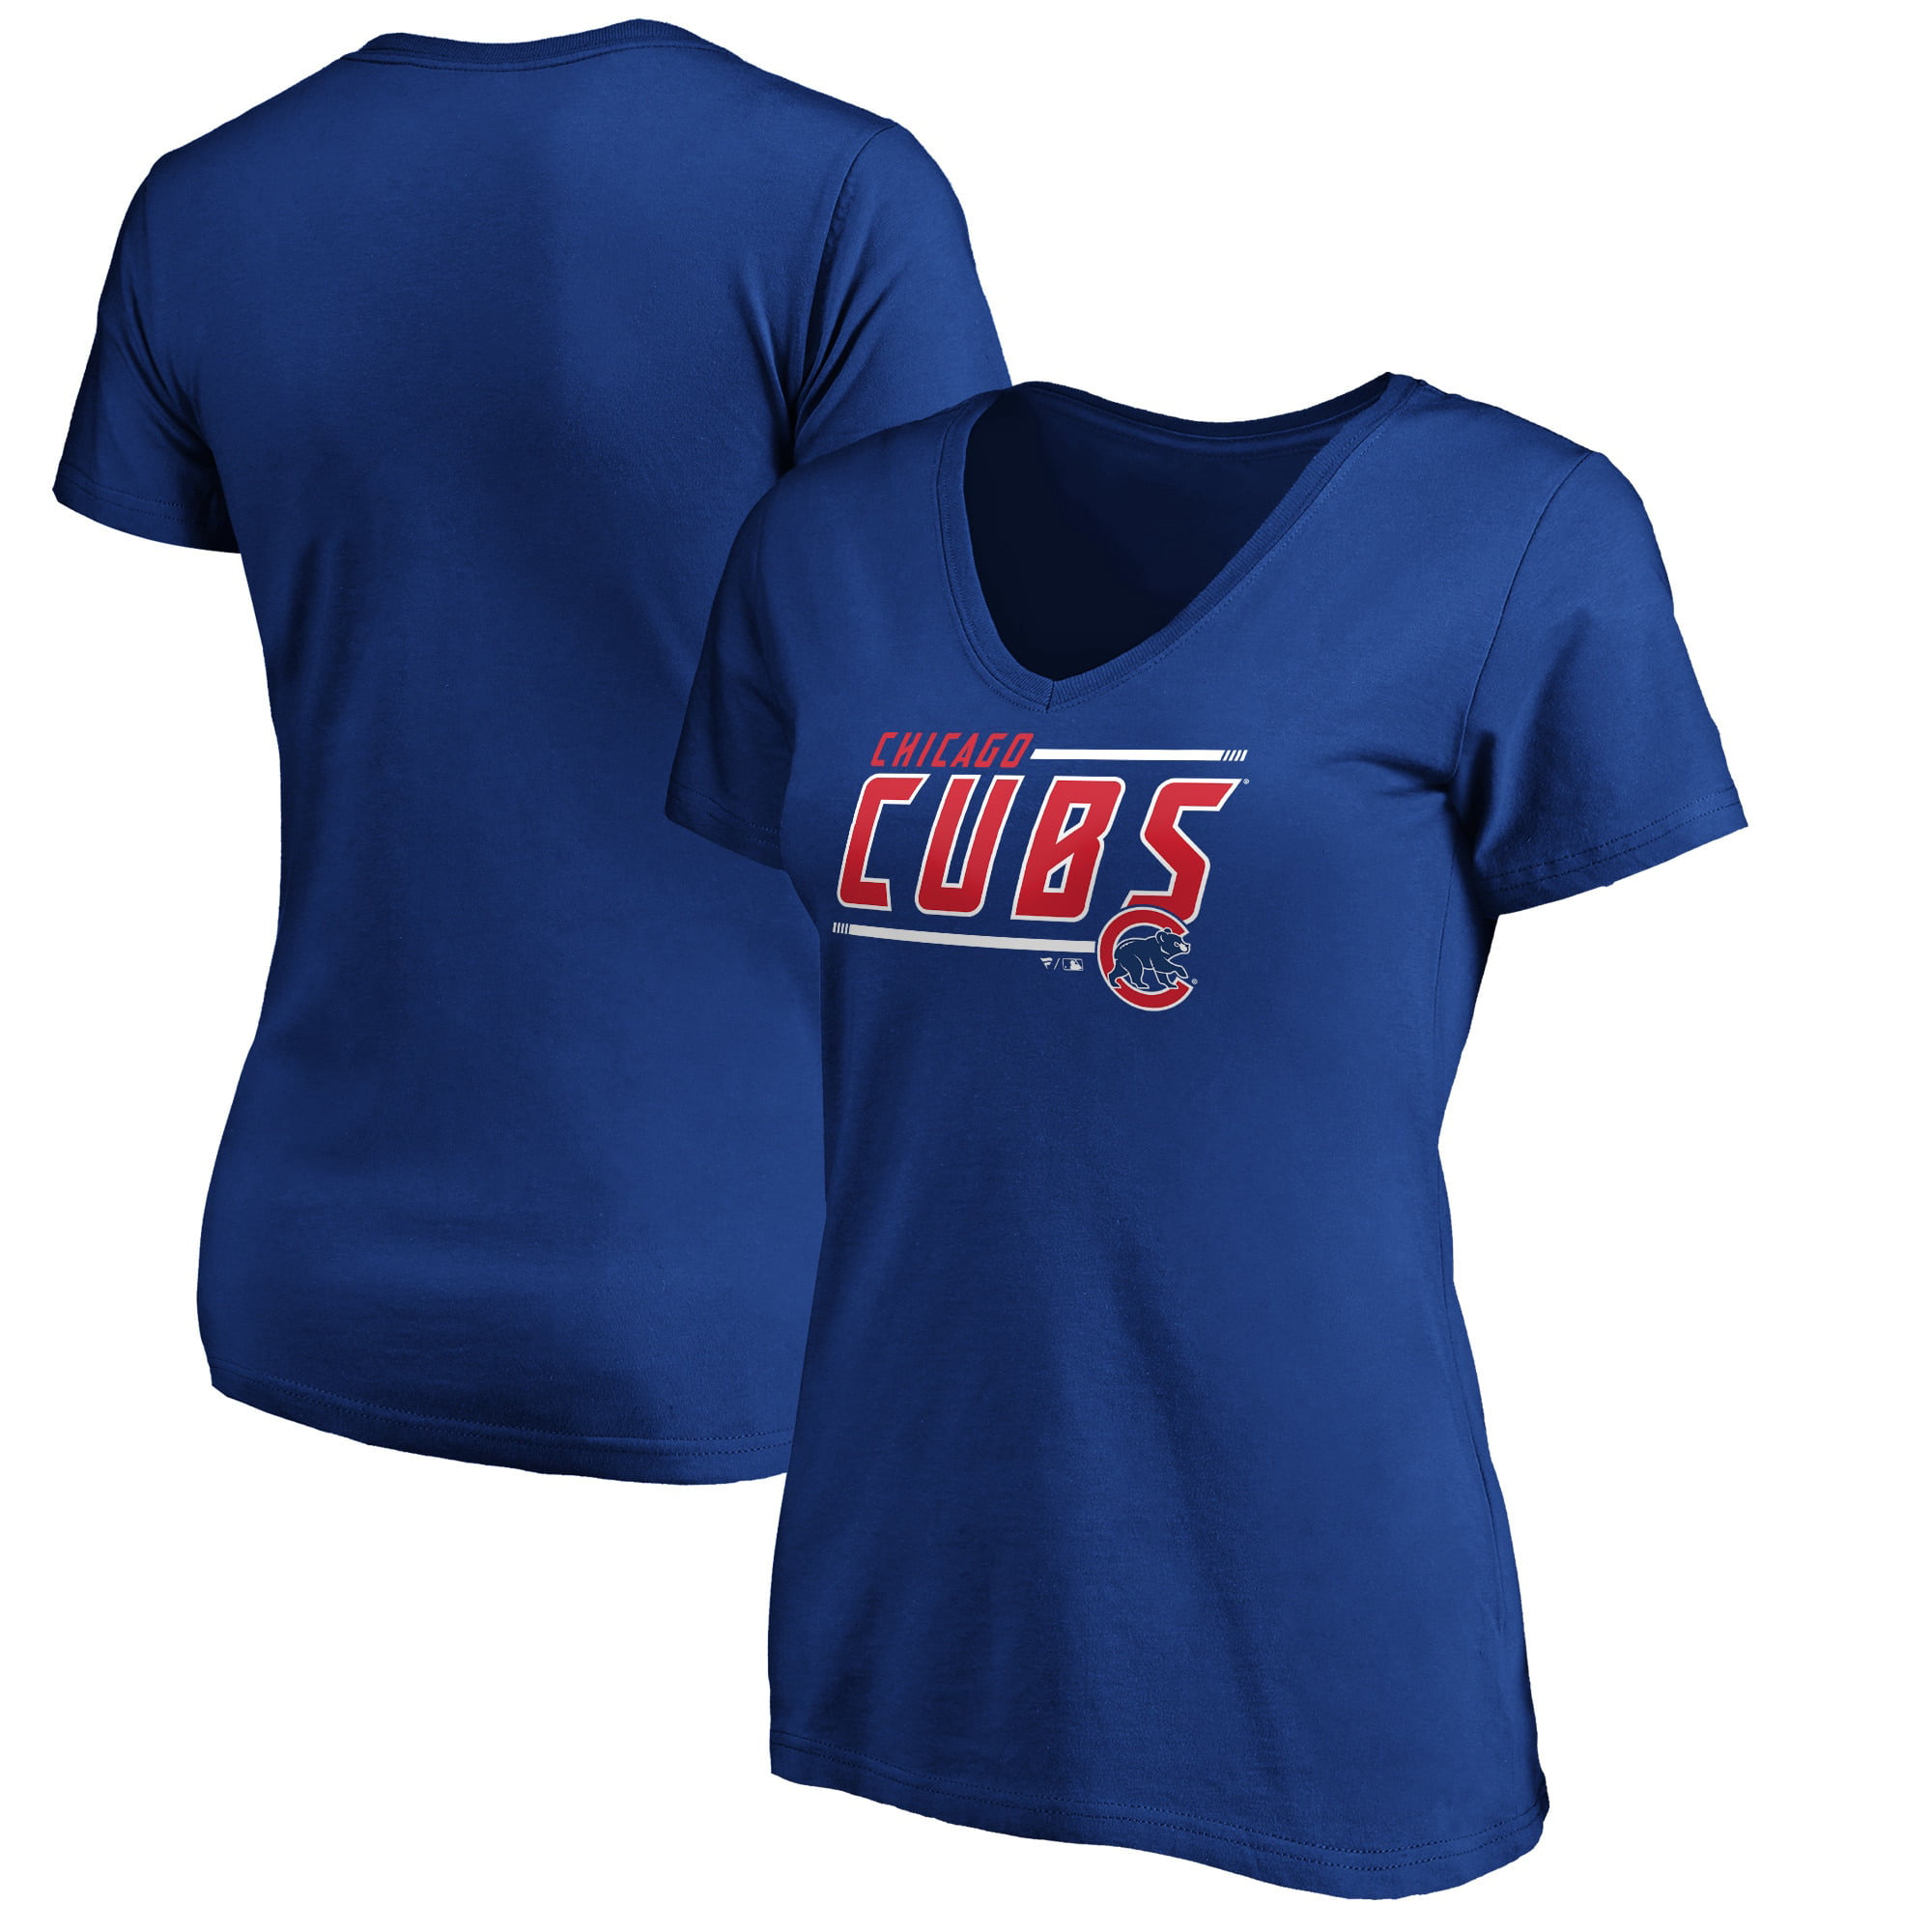 Women's Fanatics Branded Royal Chicago Cubs Mascot In Bounds V-Neck T-Shirt  